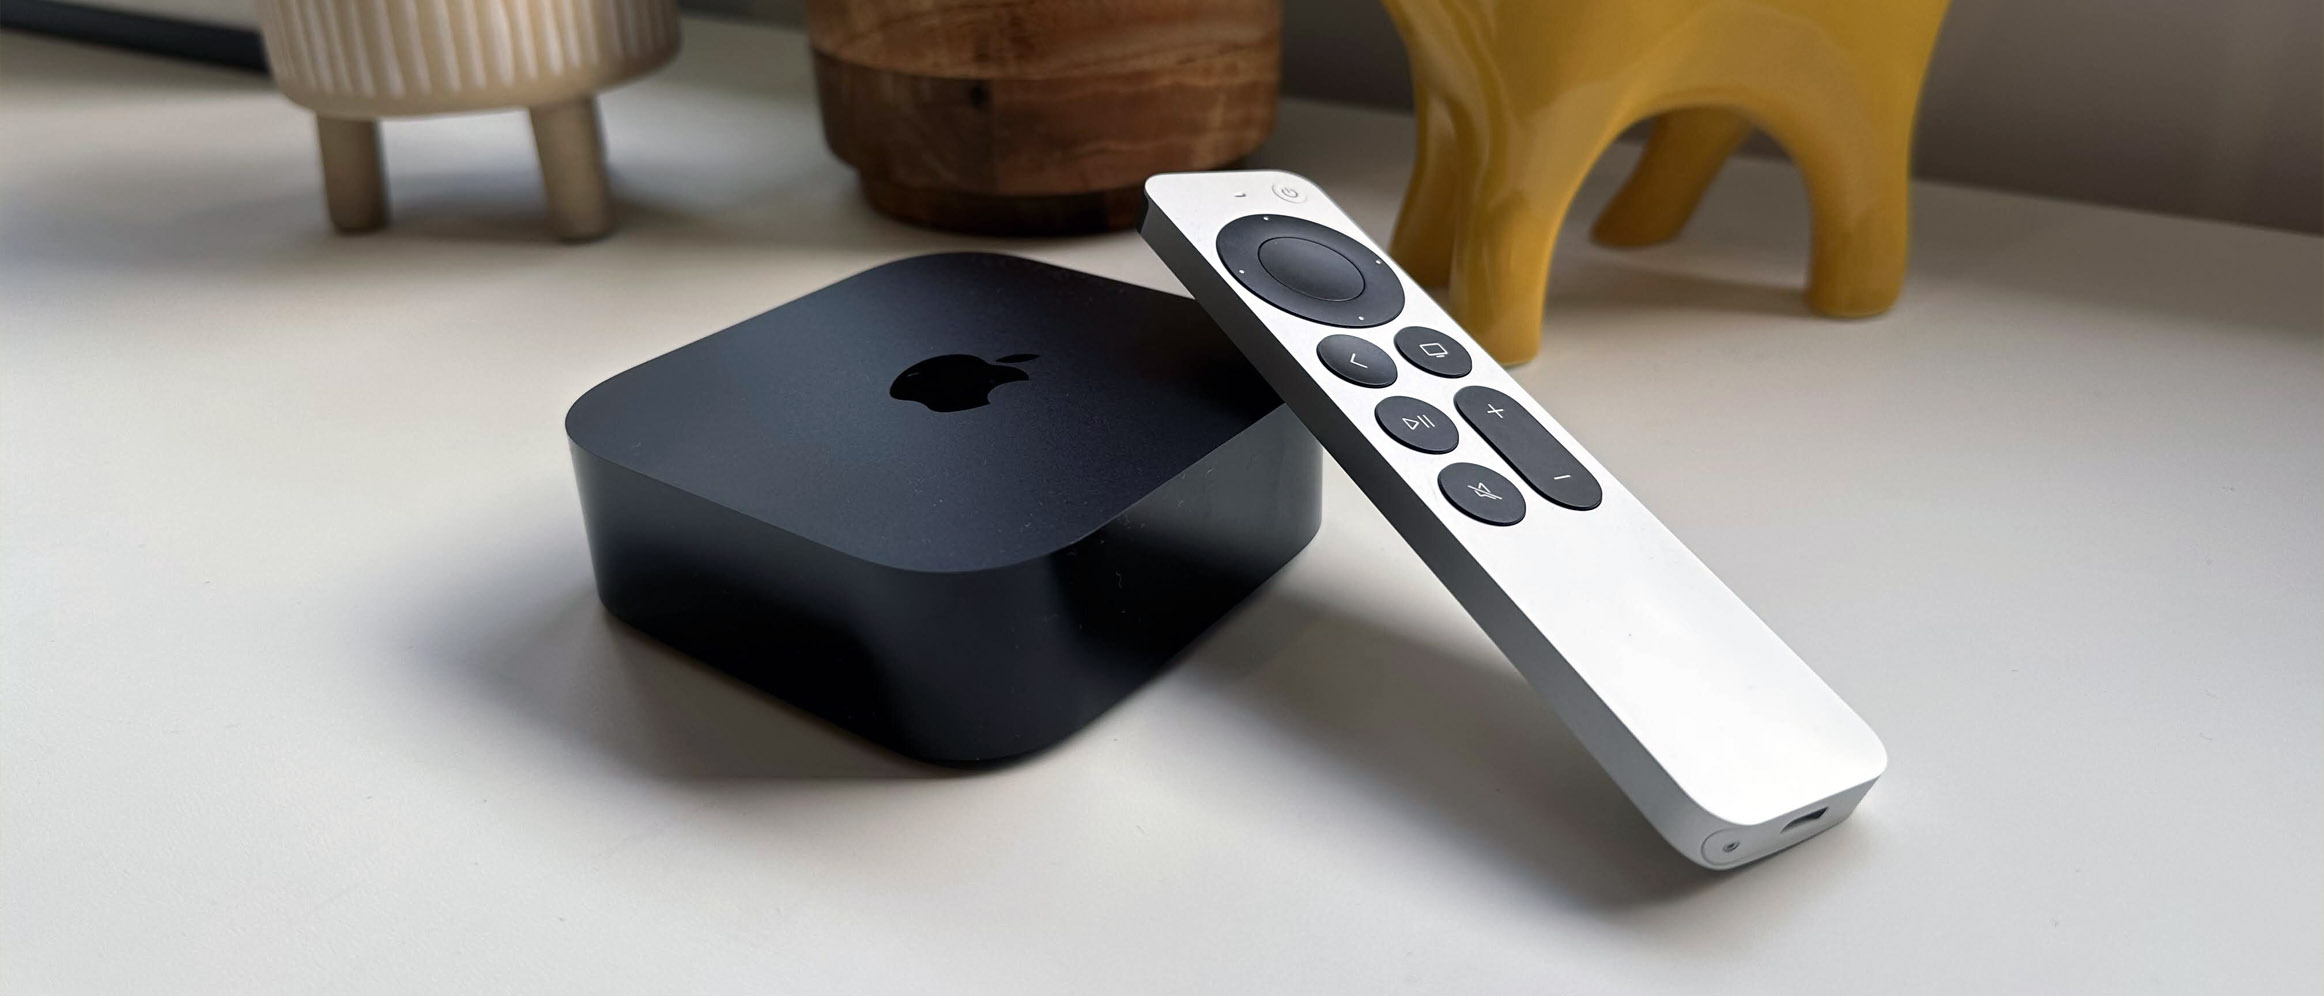 Apple TV 4K review: for the spotlight in your room |